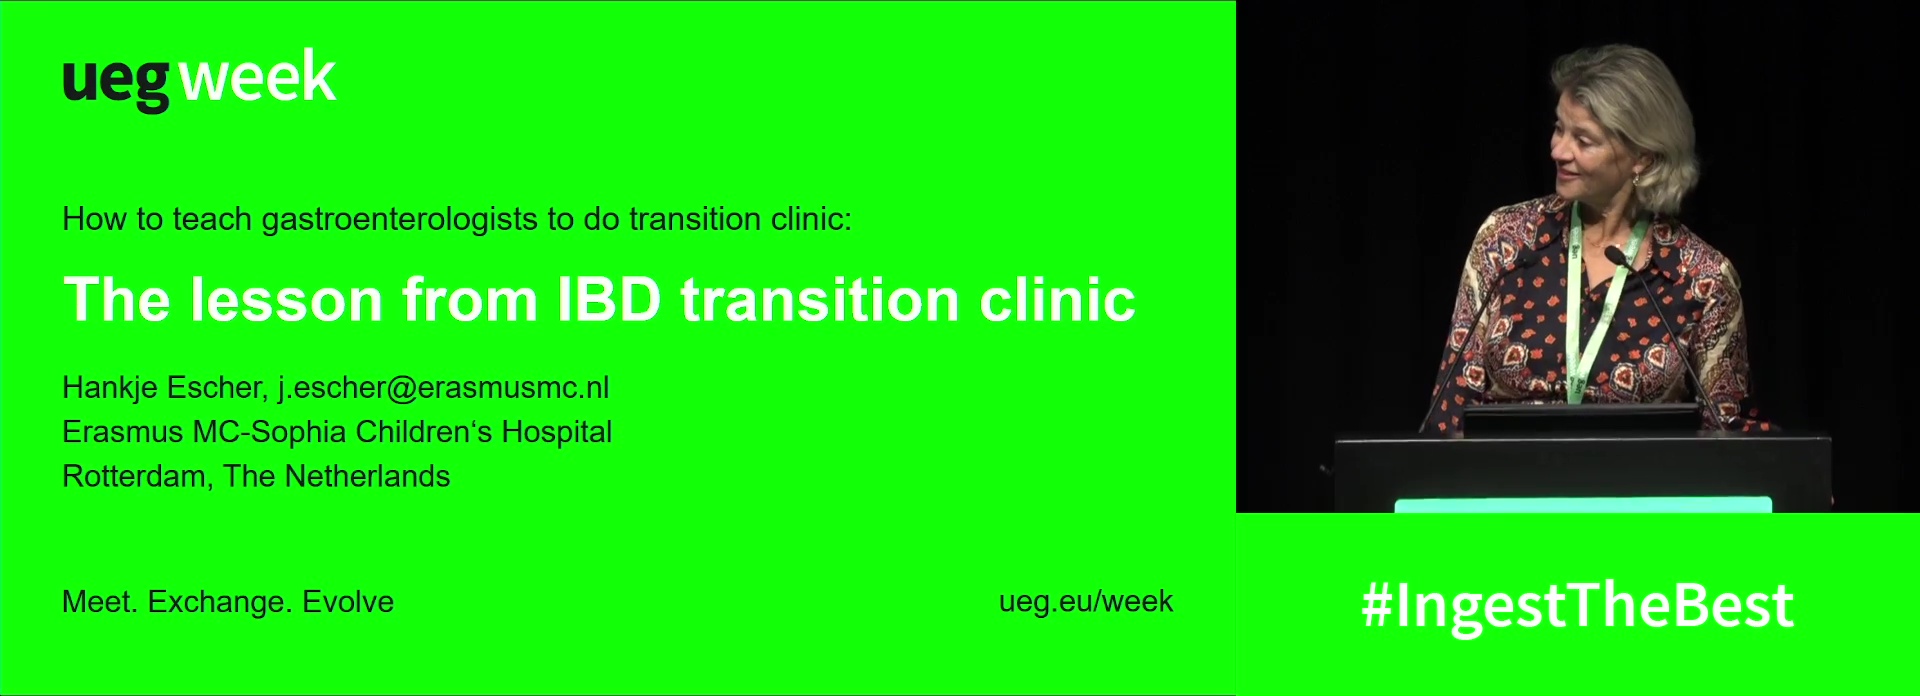 How to teach gastroenterologists to do transition clinic: The lesson from IBD transition clinic